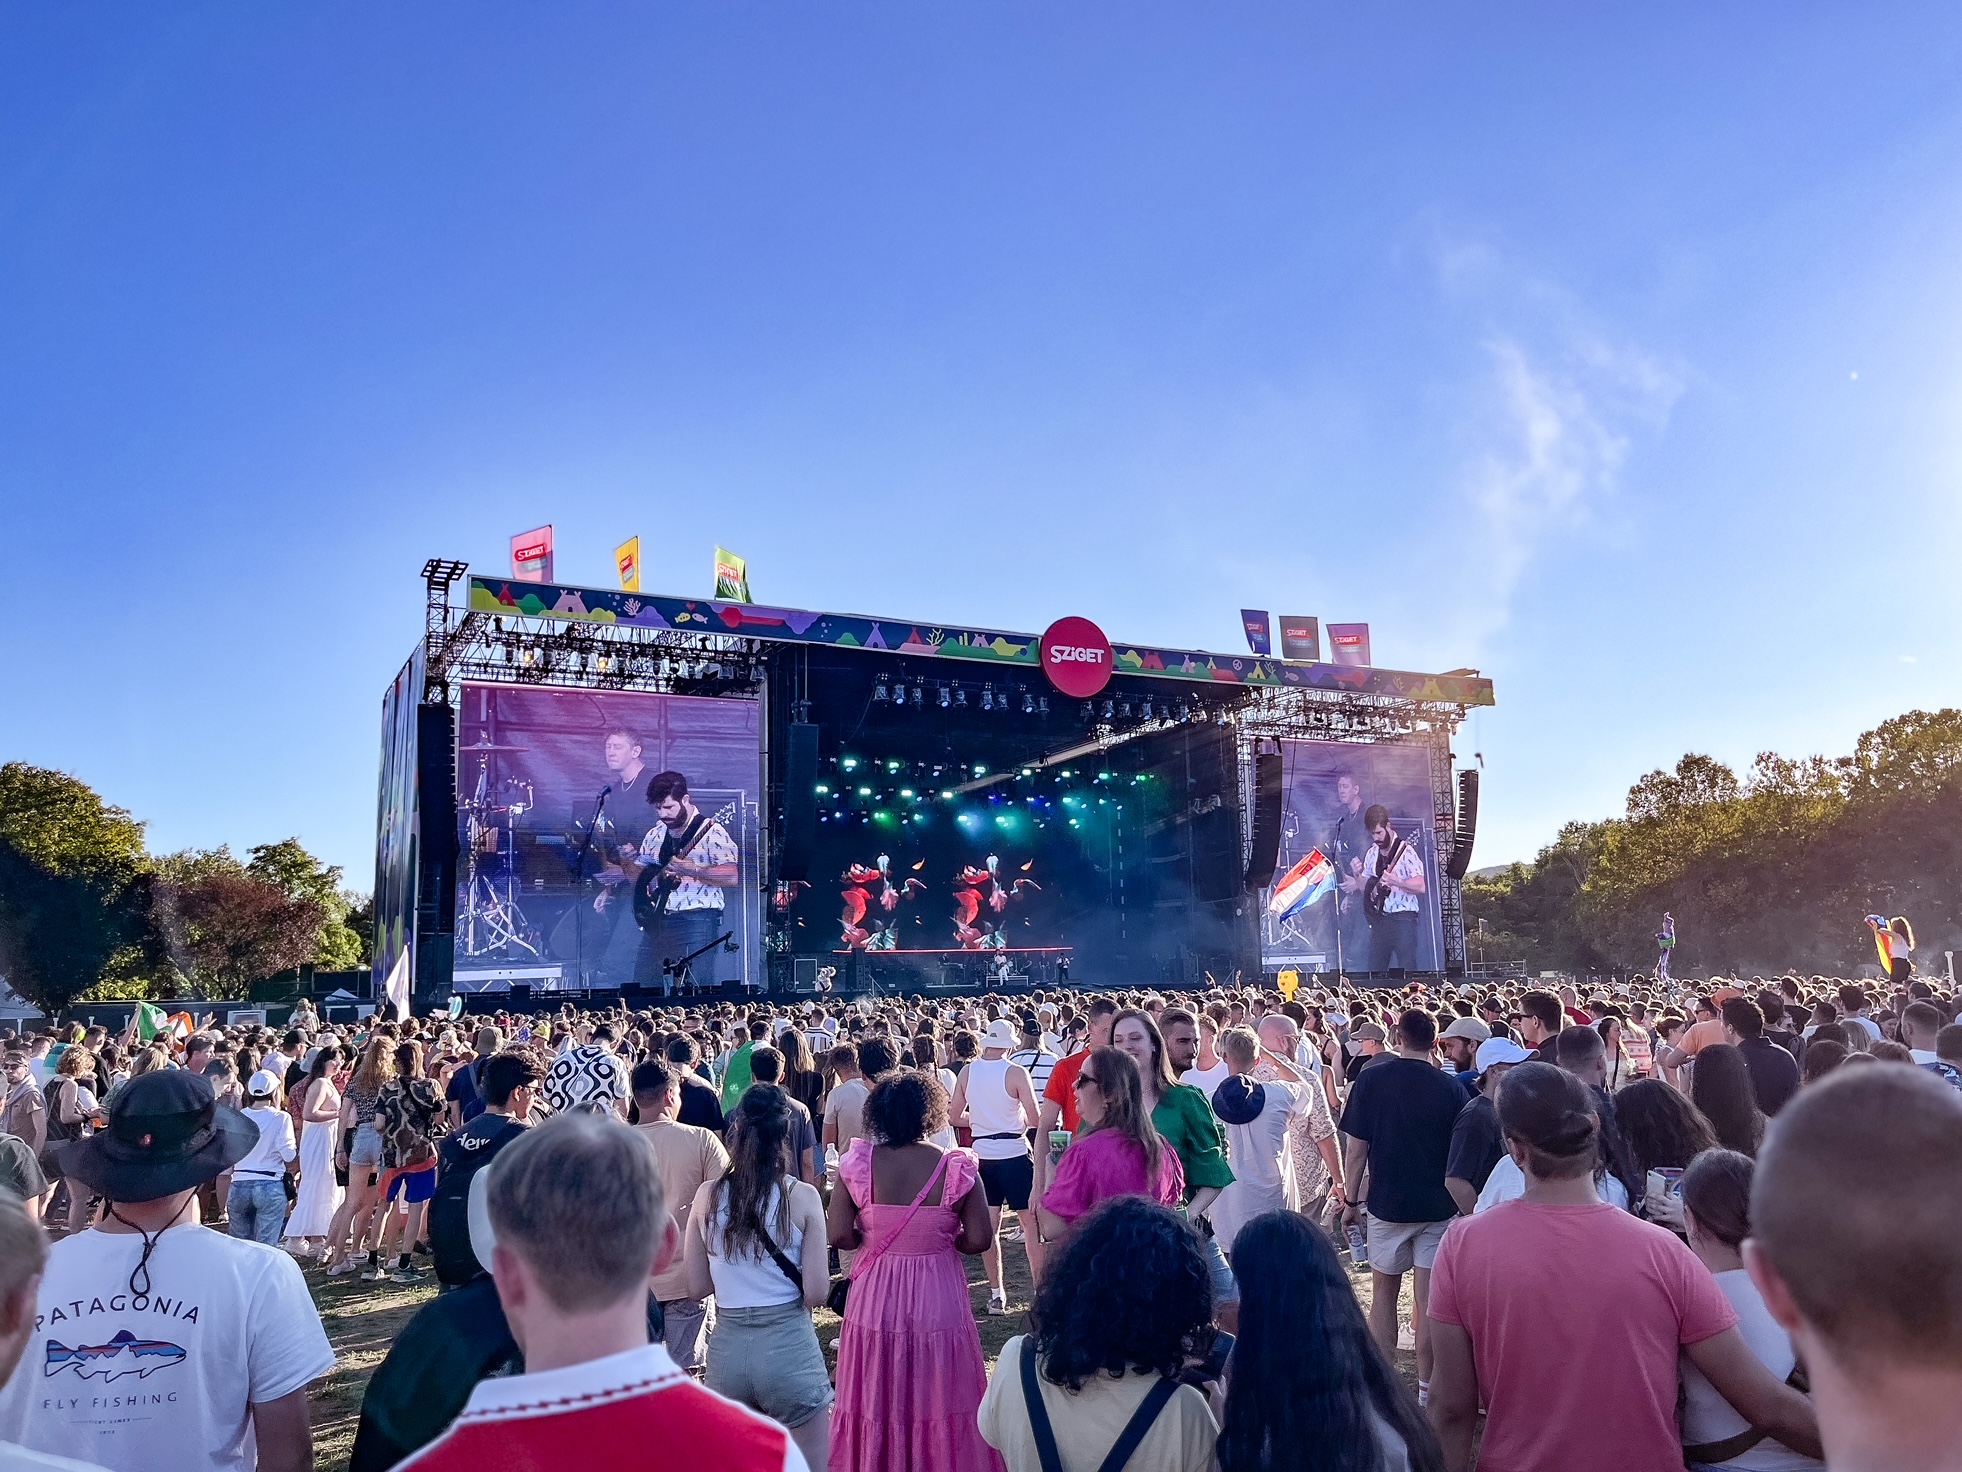 sziget festival panoramica